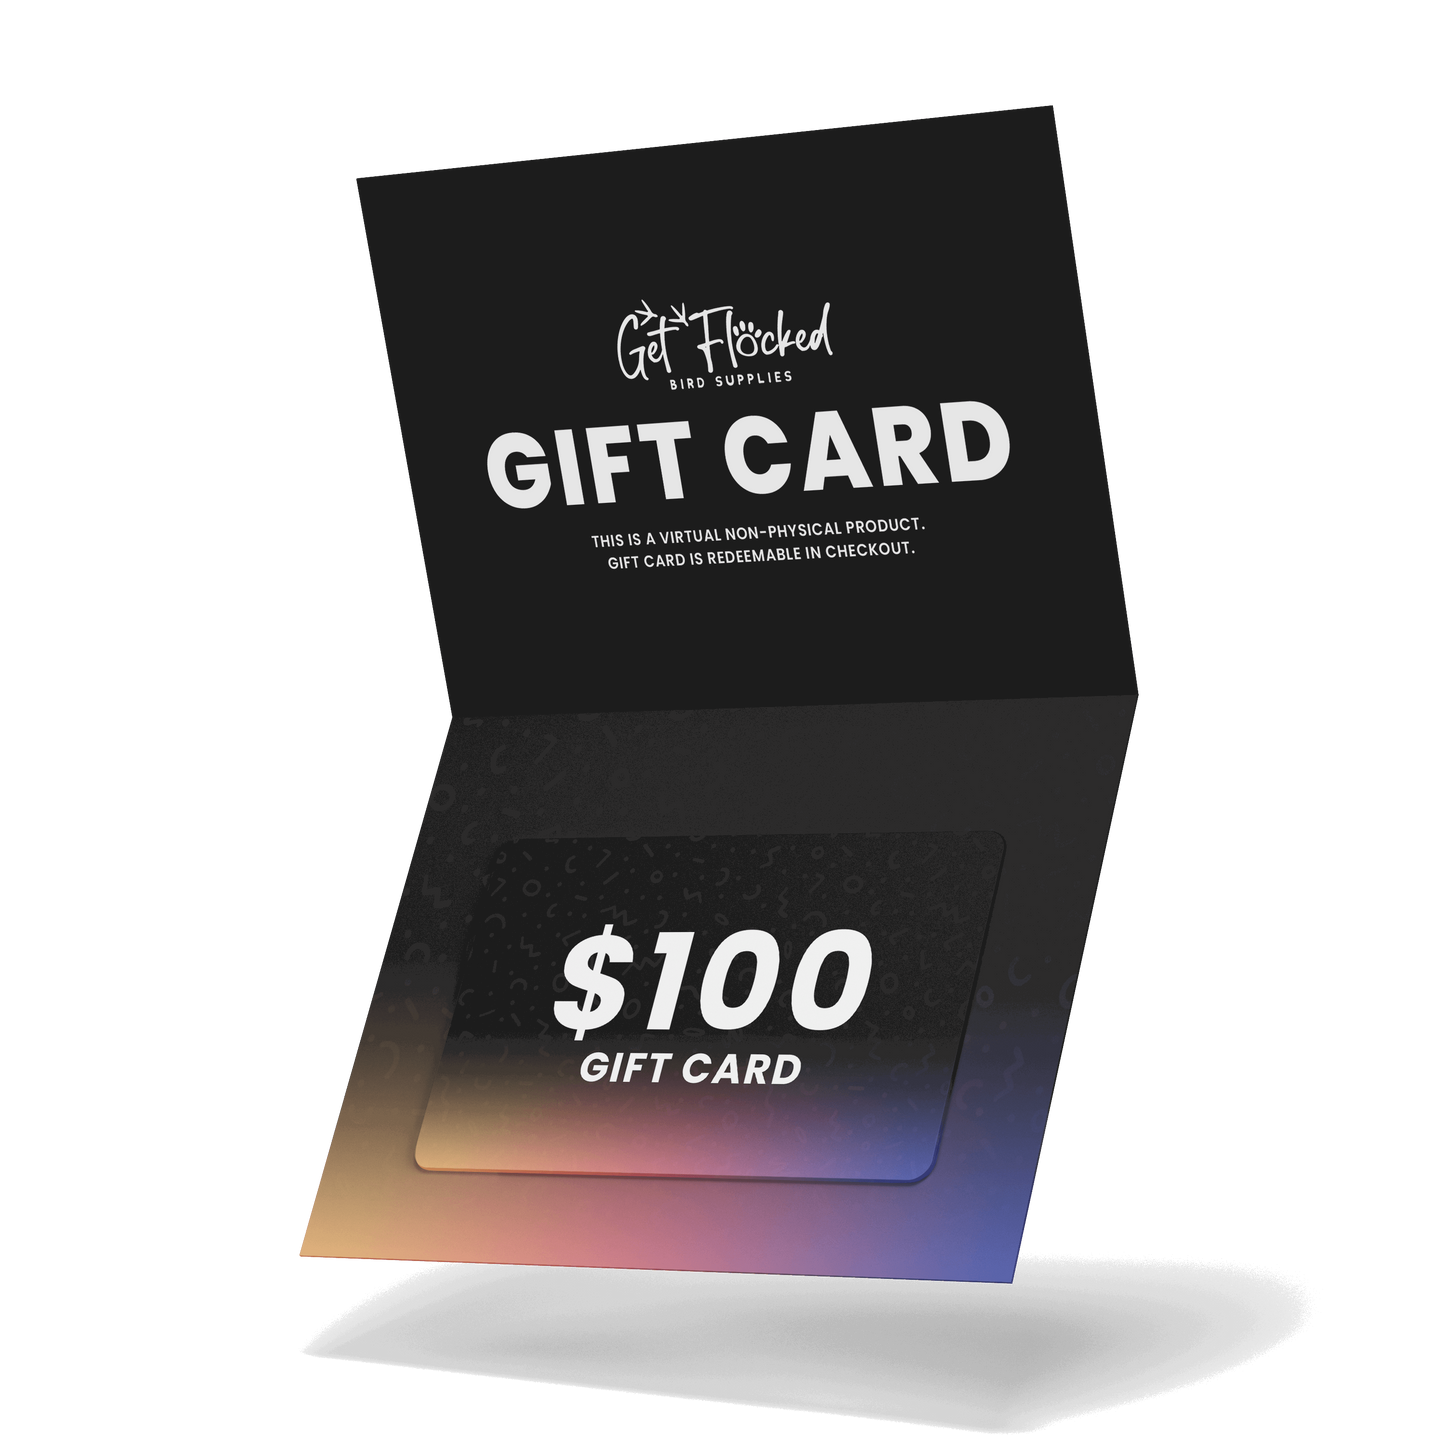 Get Flocked Gift Card from Get Flocked